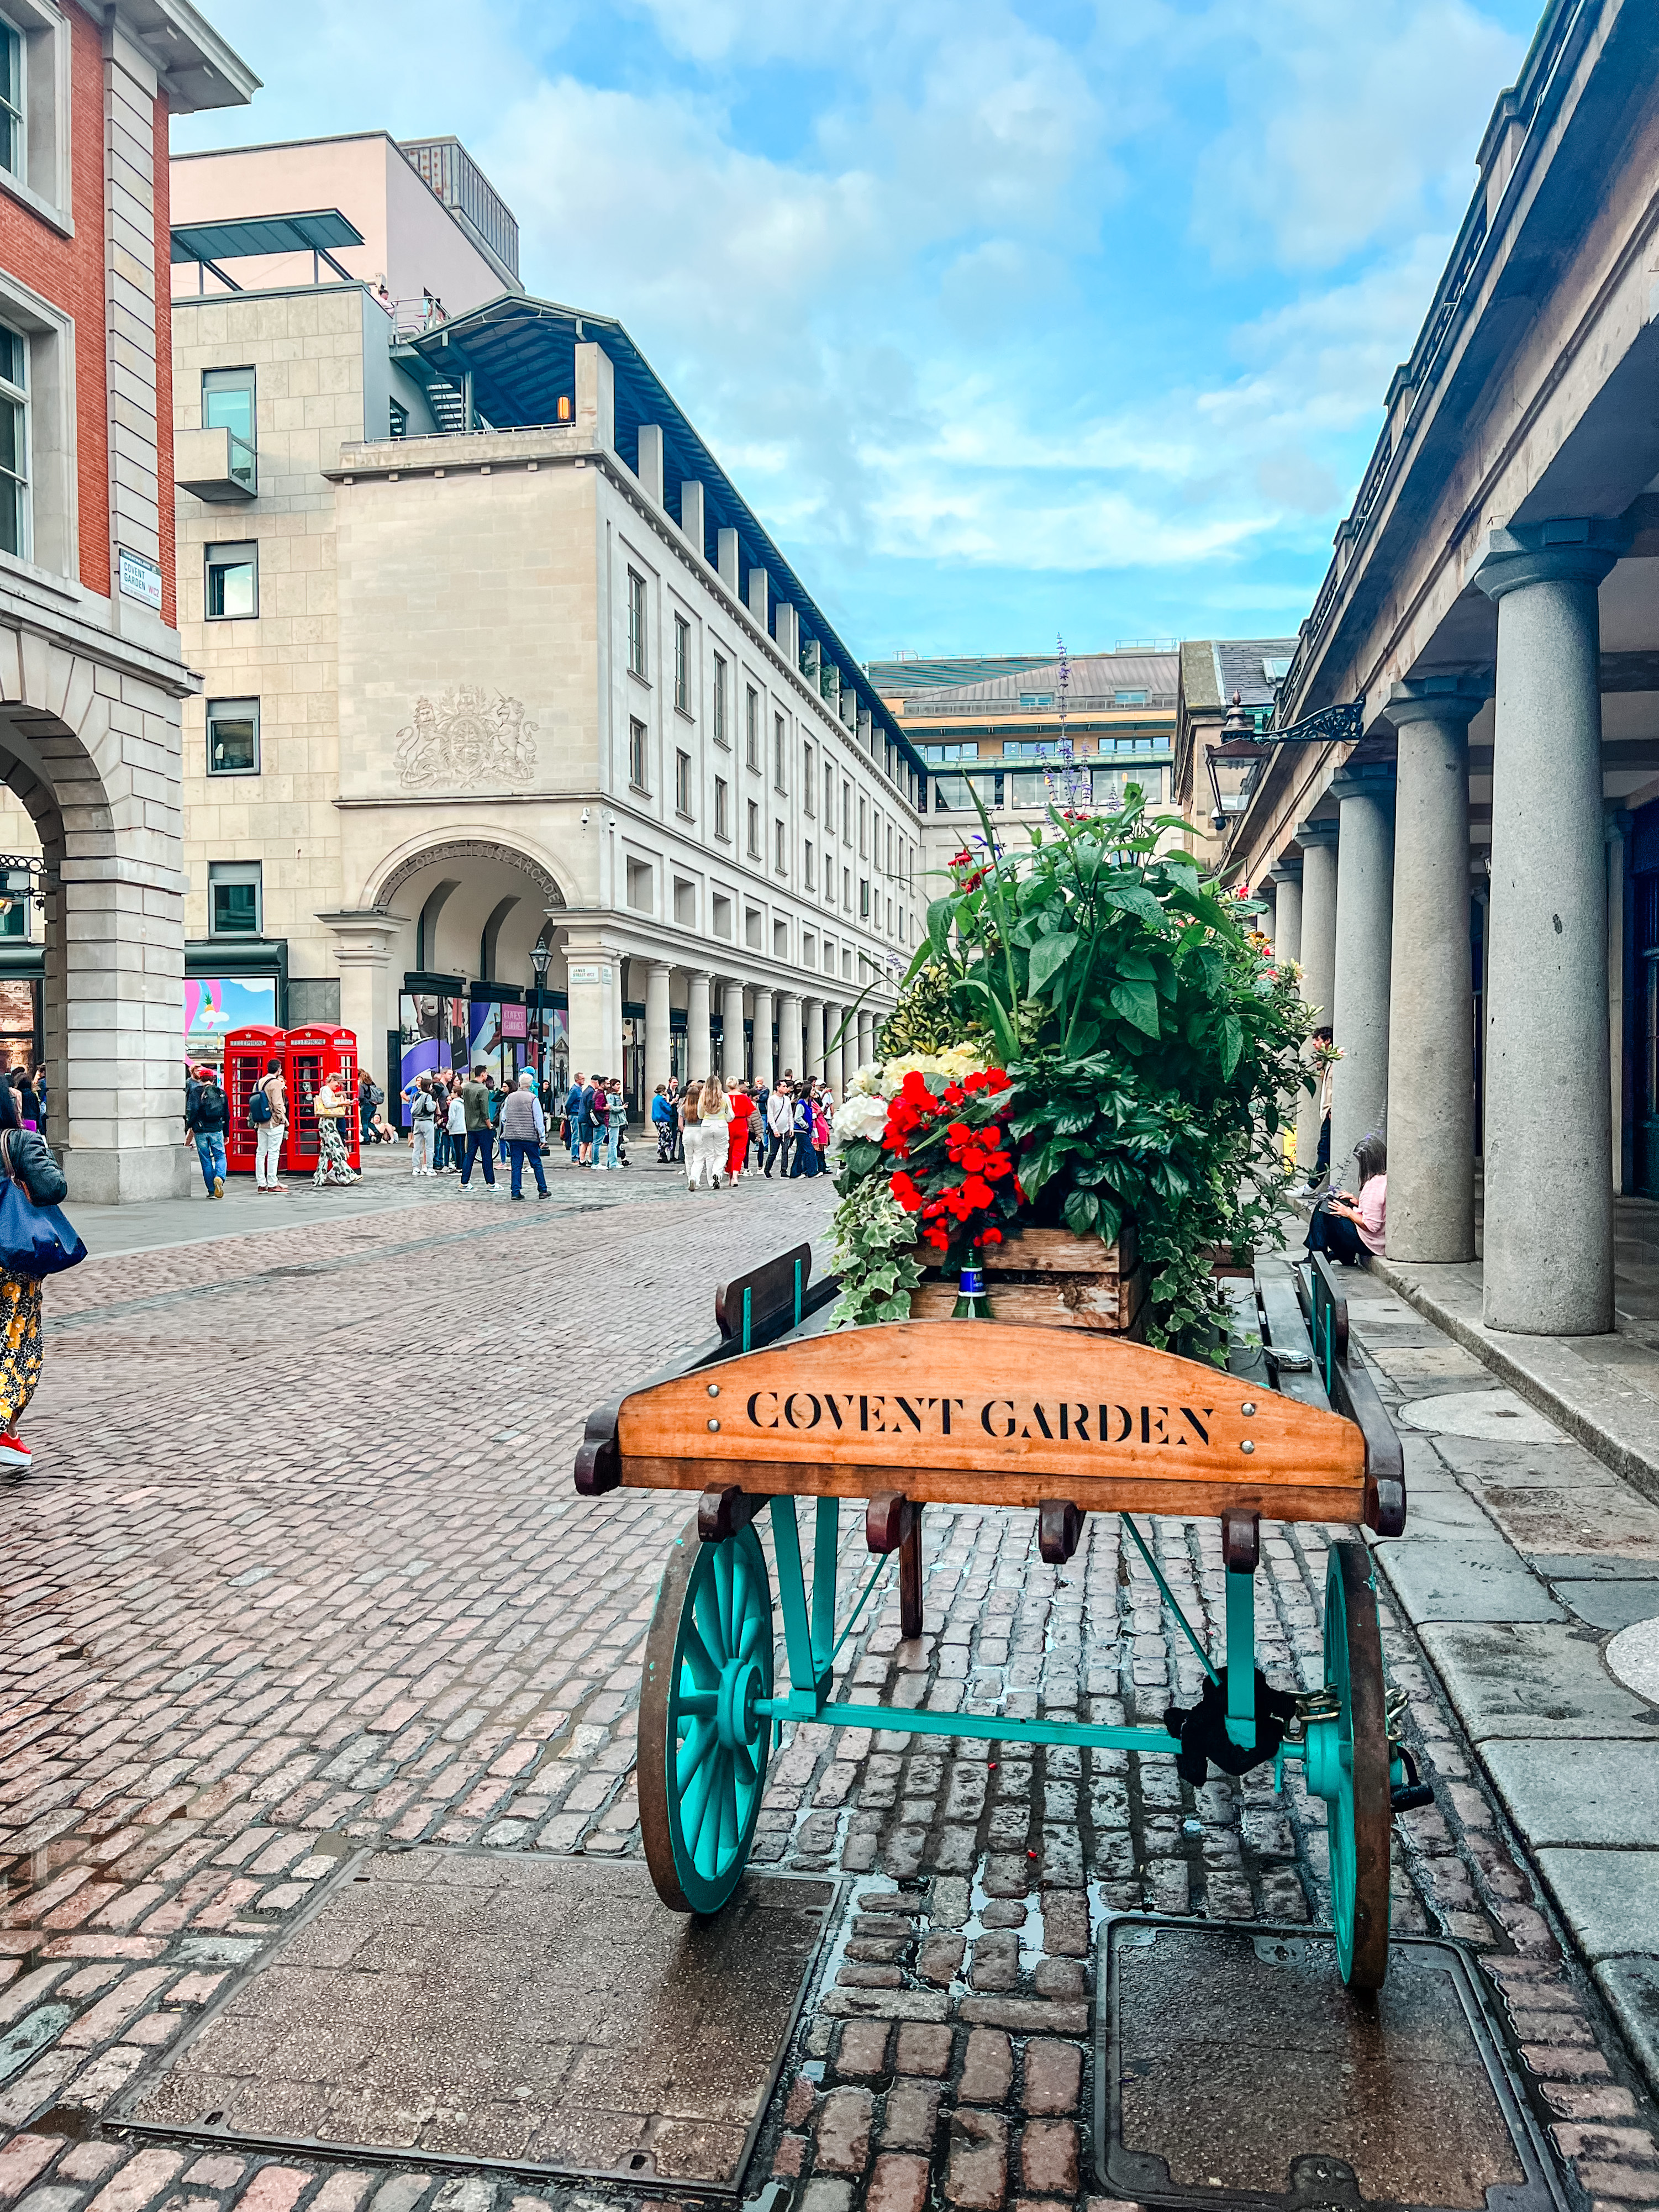 A guide to Covent Garden